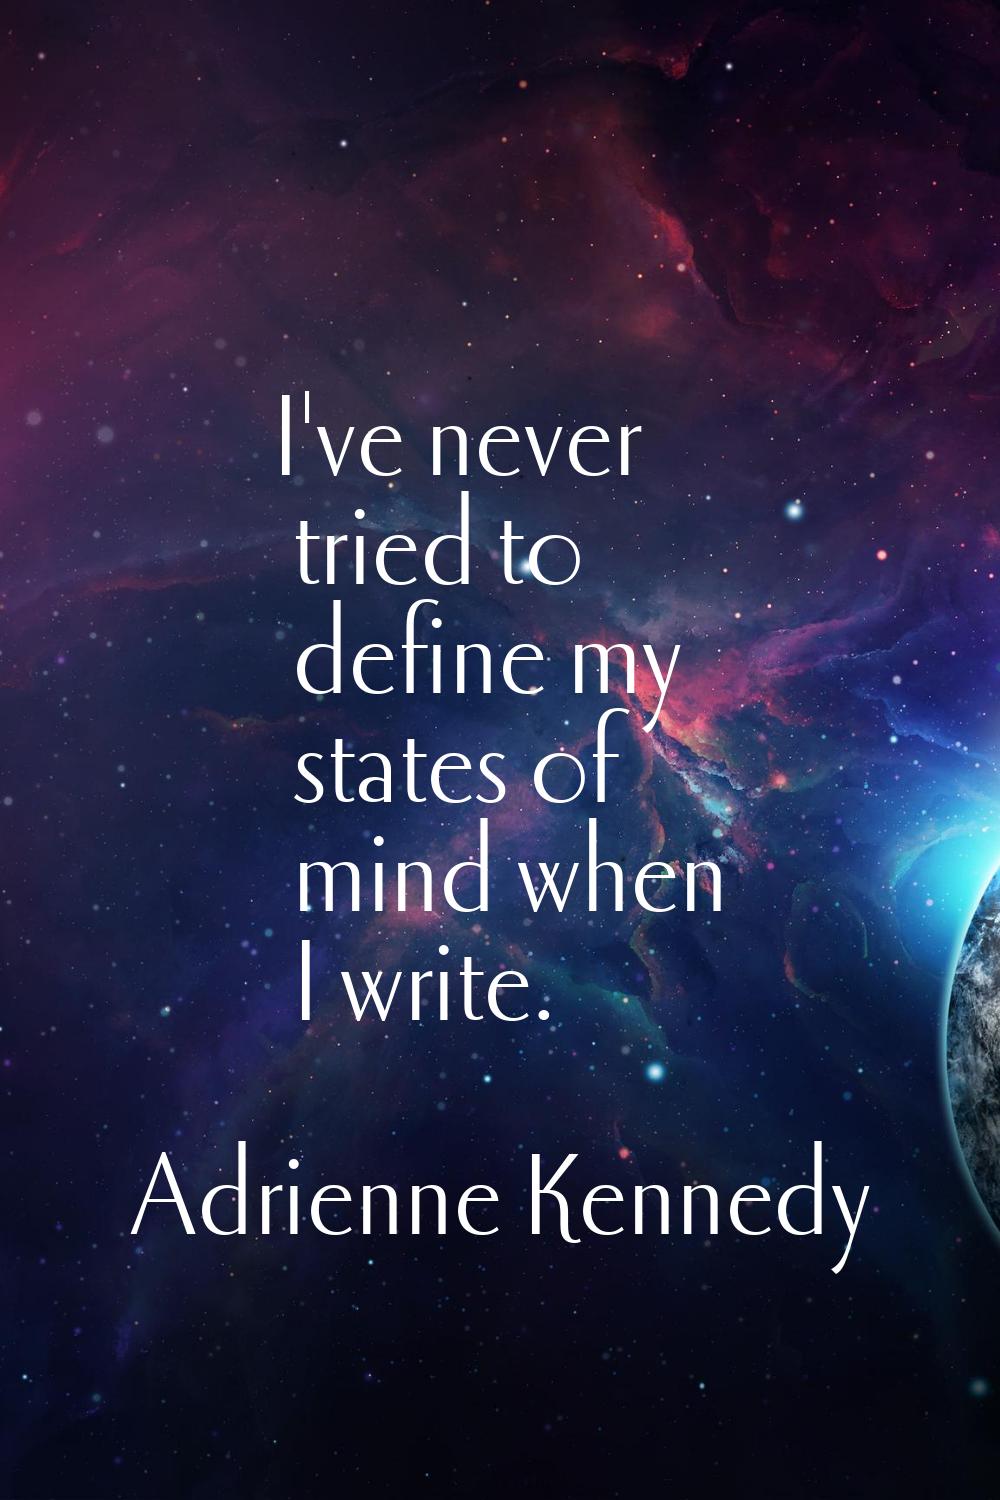 I've never tried to define my states of mind when I write.